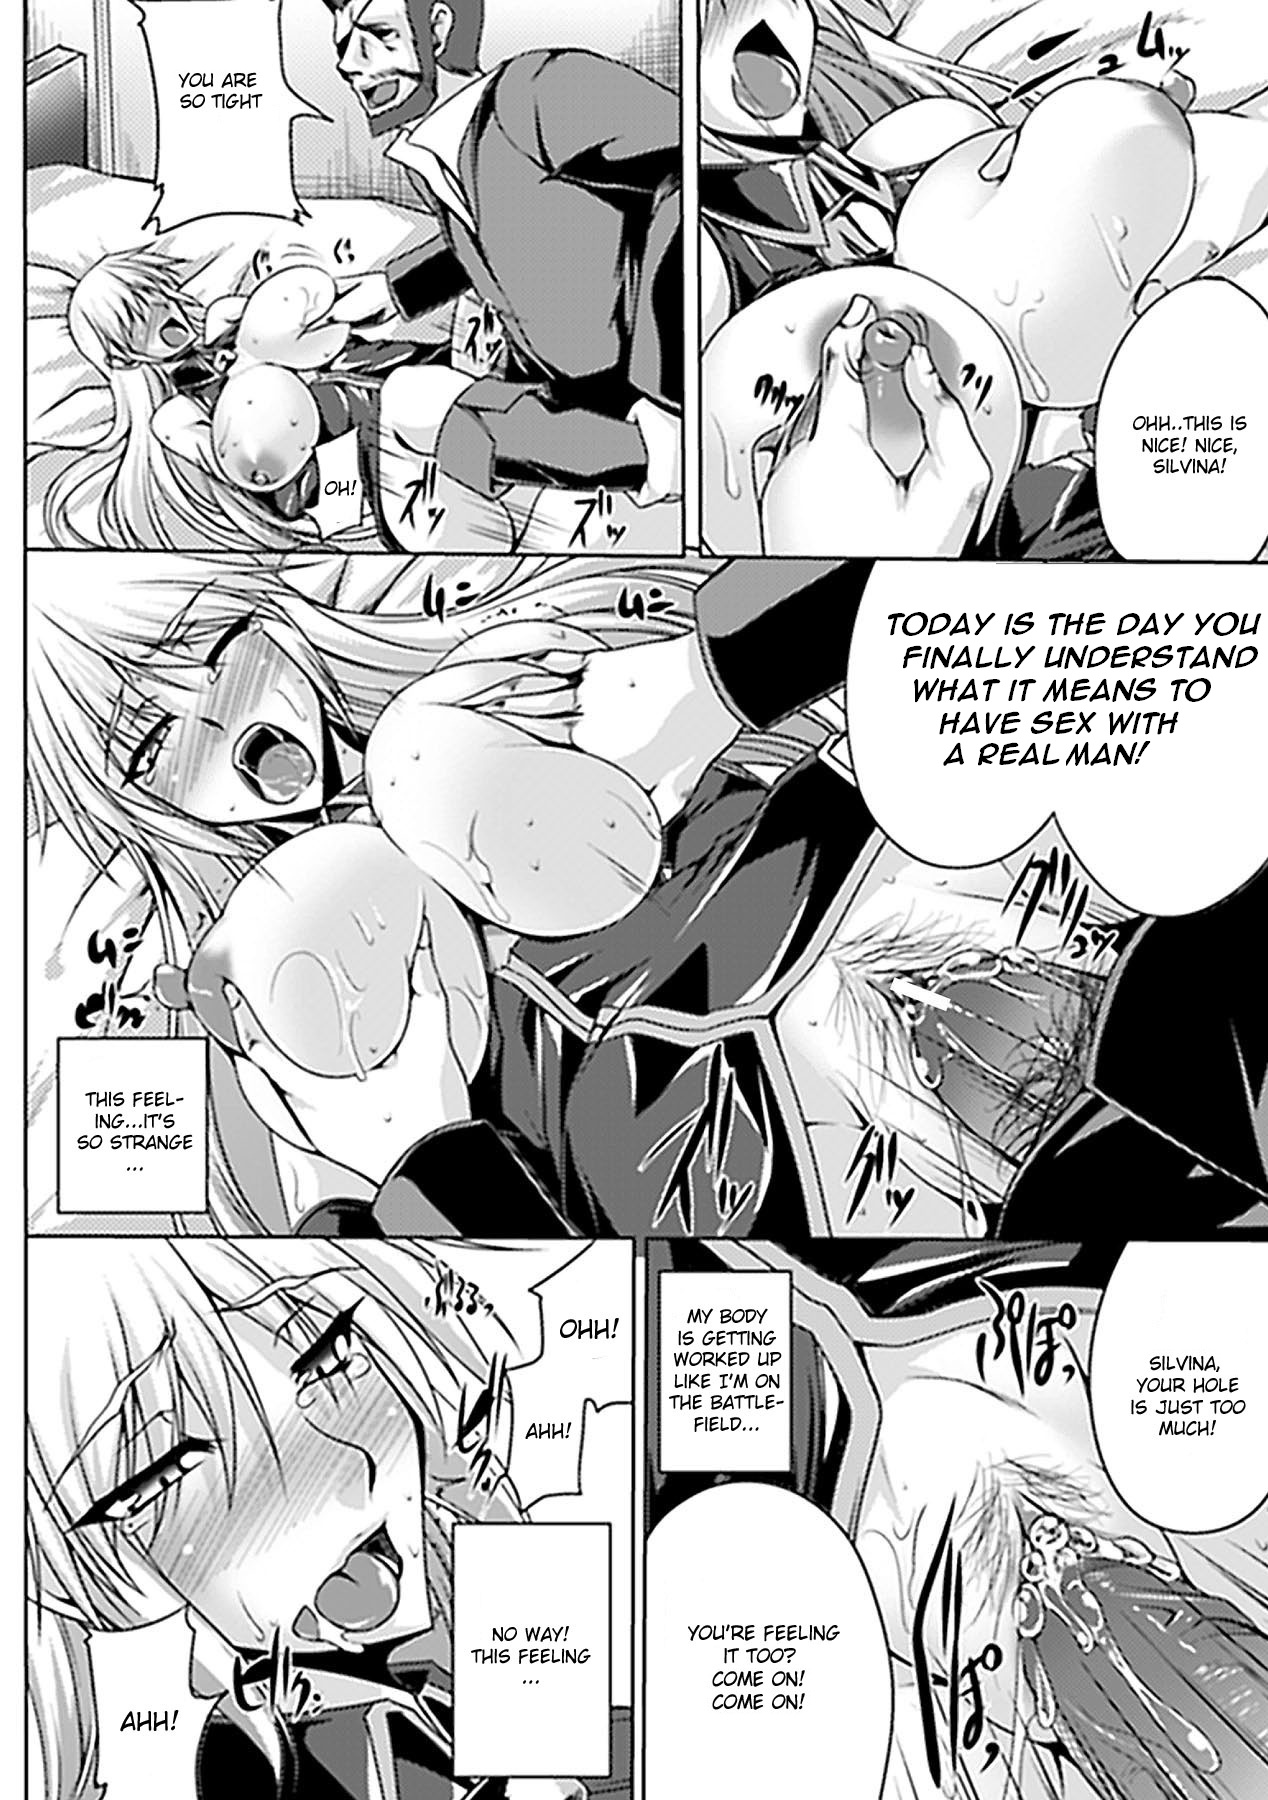 Stolen Military Princess [English] [Rewrite] page 9 full